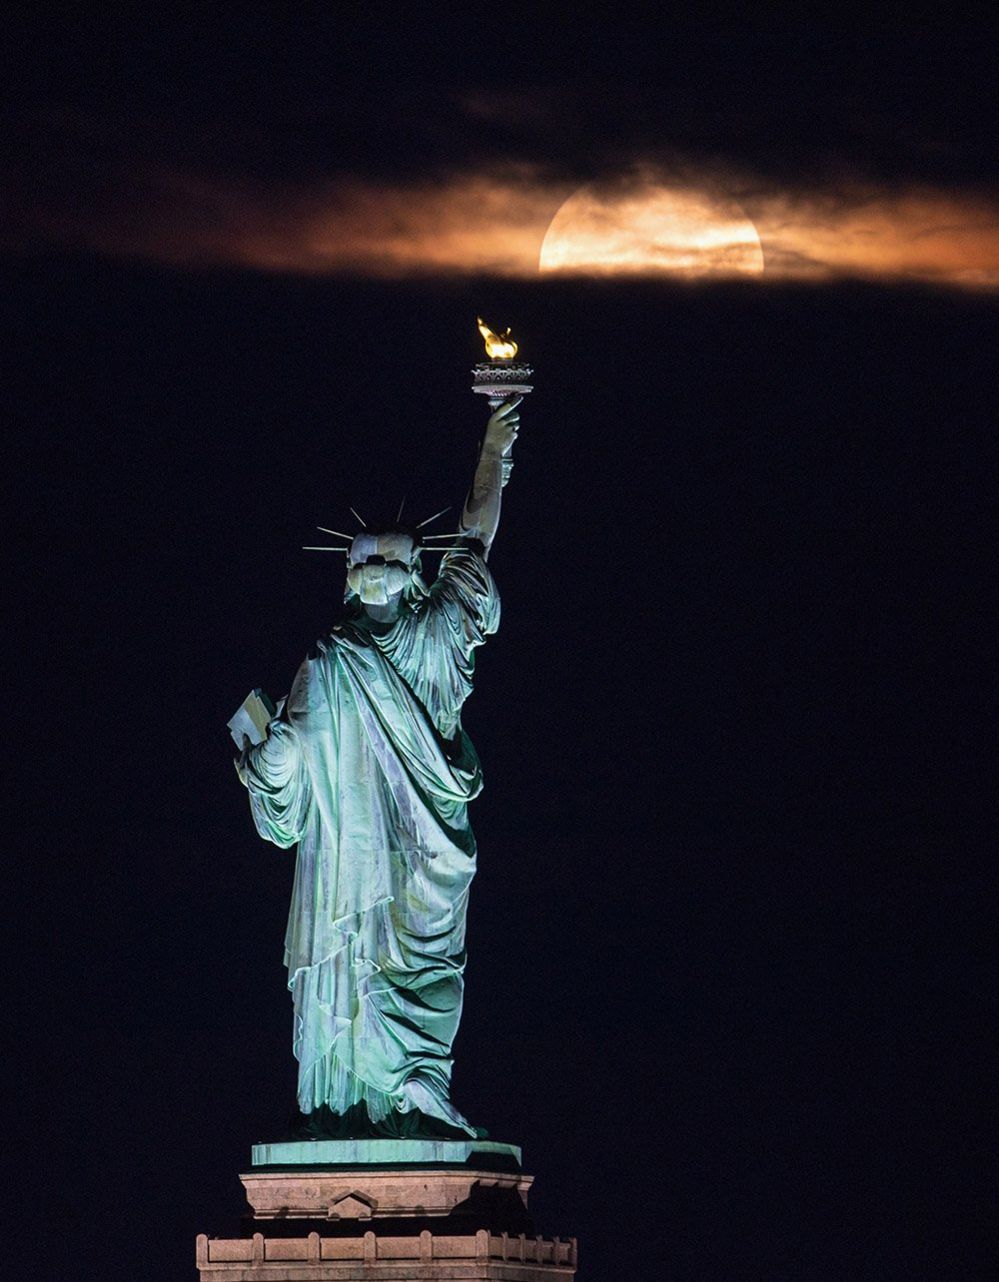 The Statue of Liberty in New York seemingly looks towards the rising moon